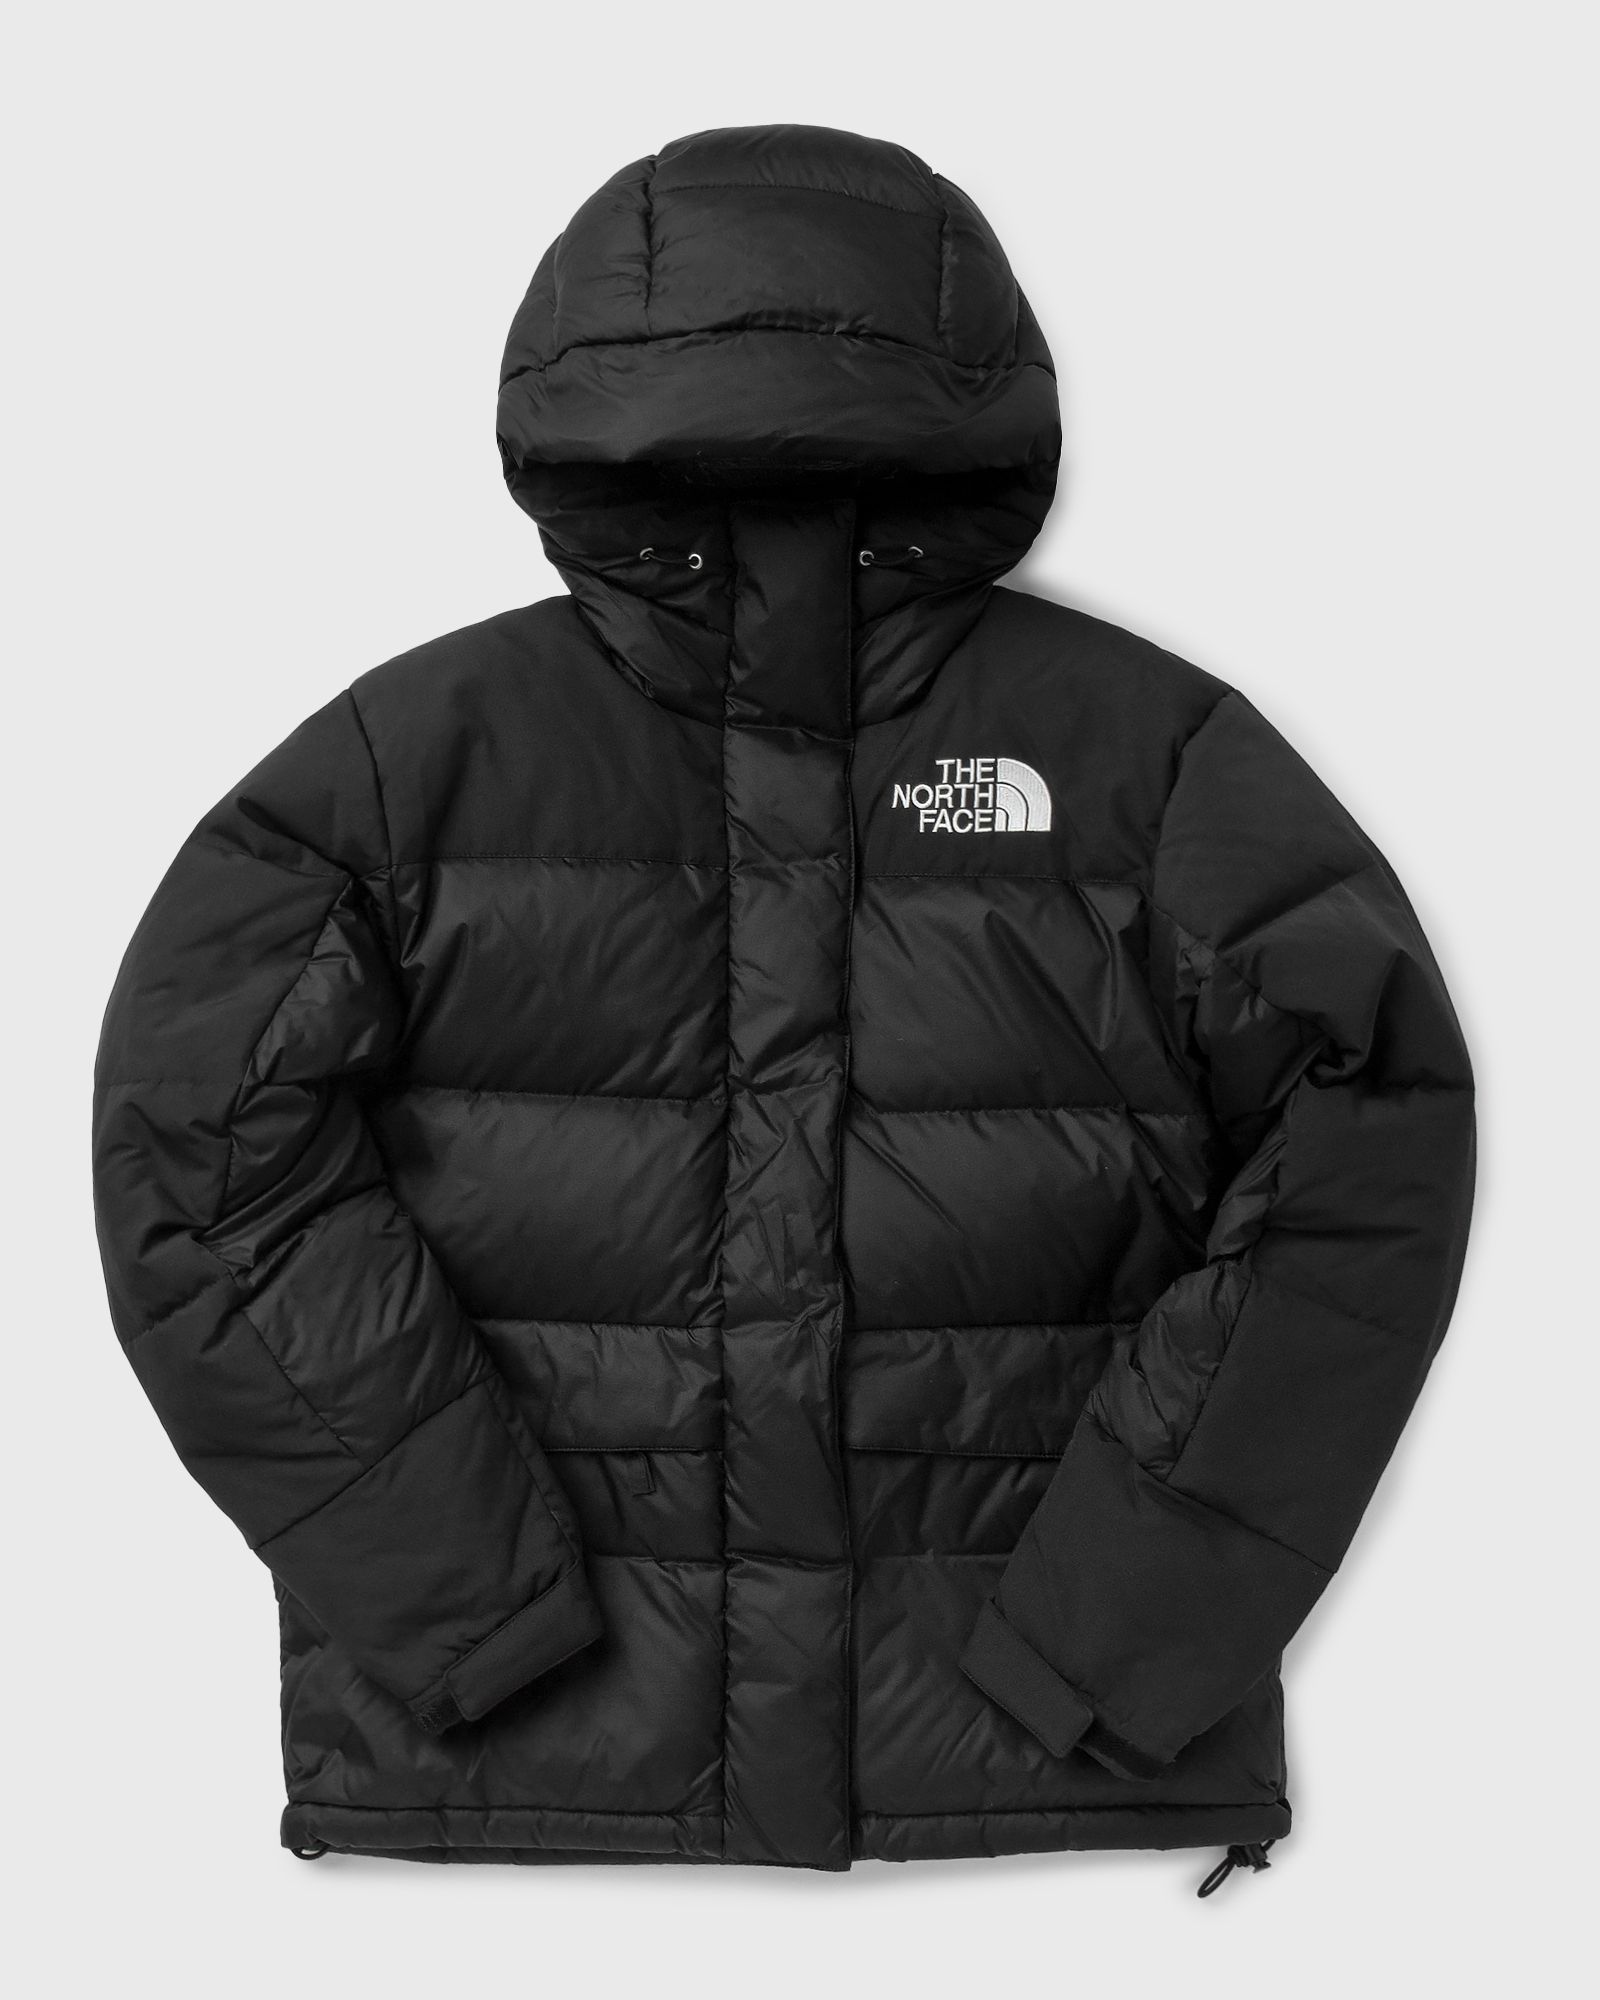 The North Face - wmns himalayan down parka women down & puffer jackets|parkas black in größe:s